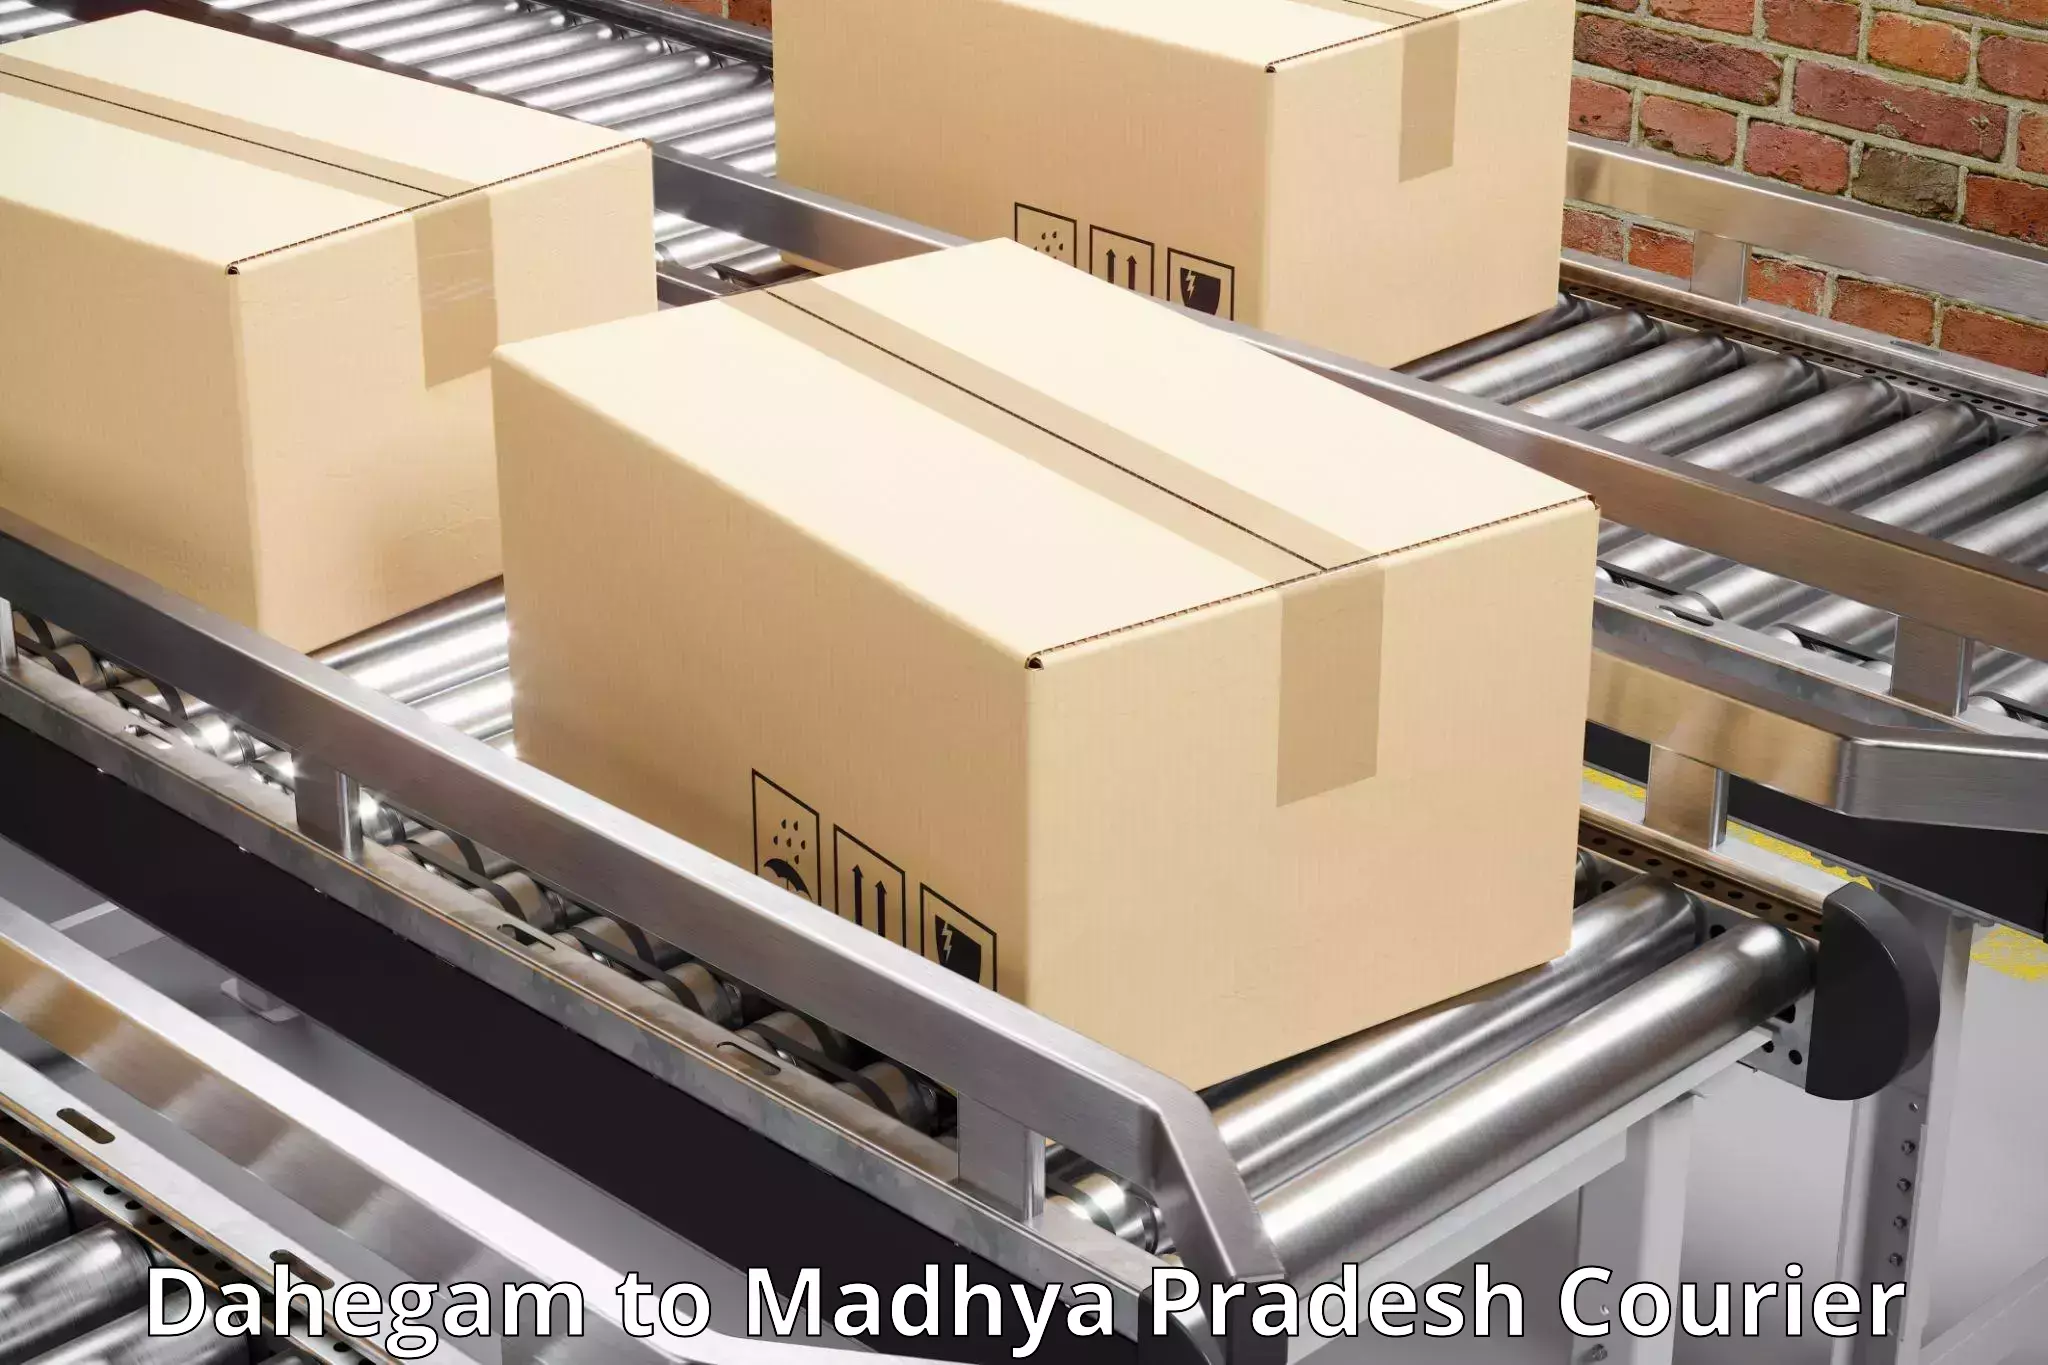 Dynamic courier operations Dahegam to Shahgarh